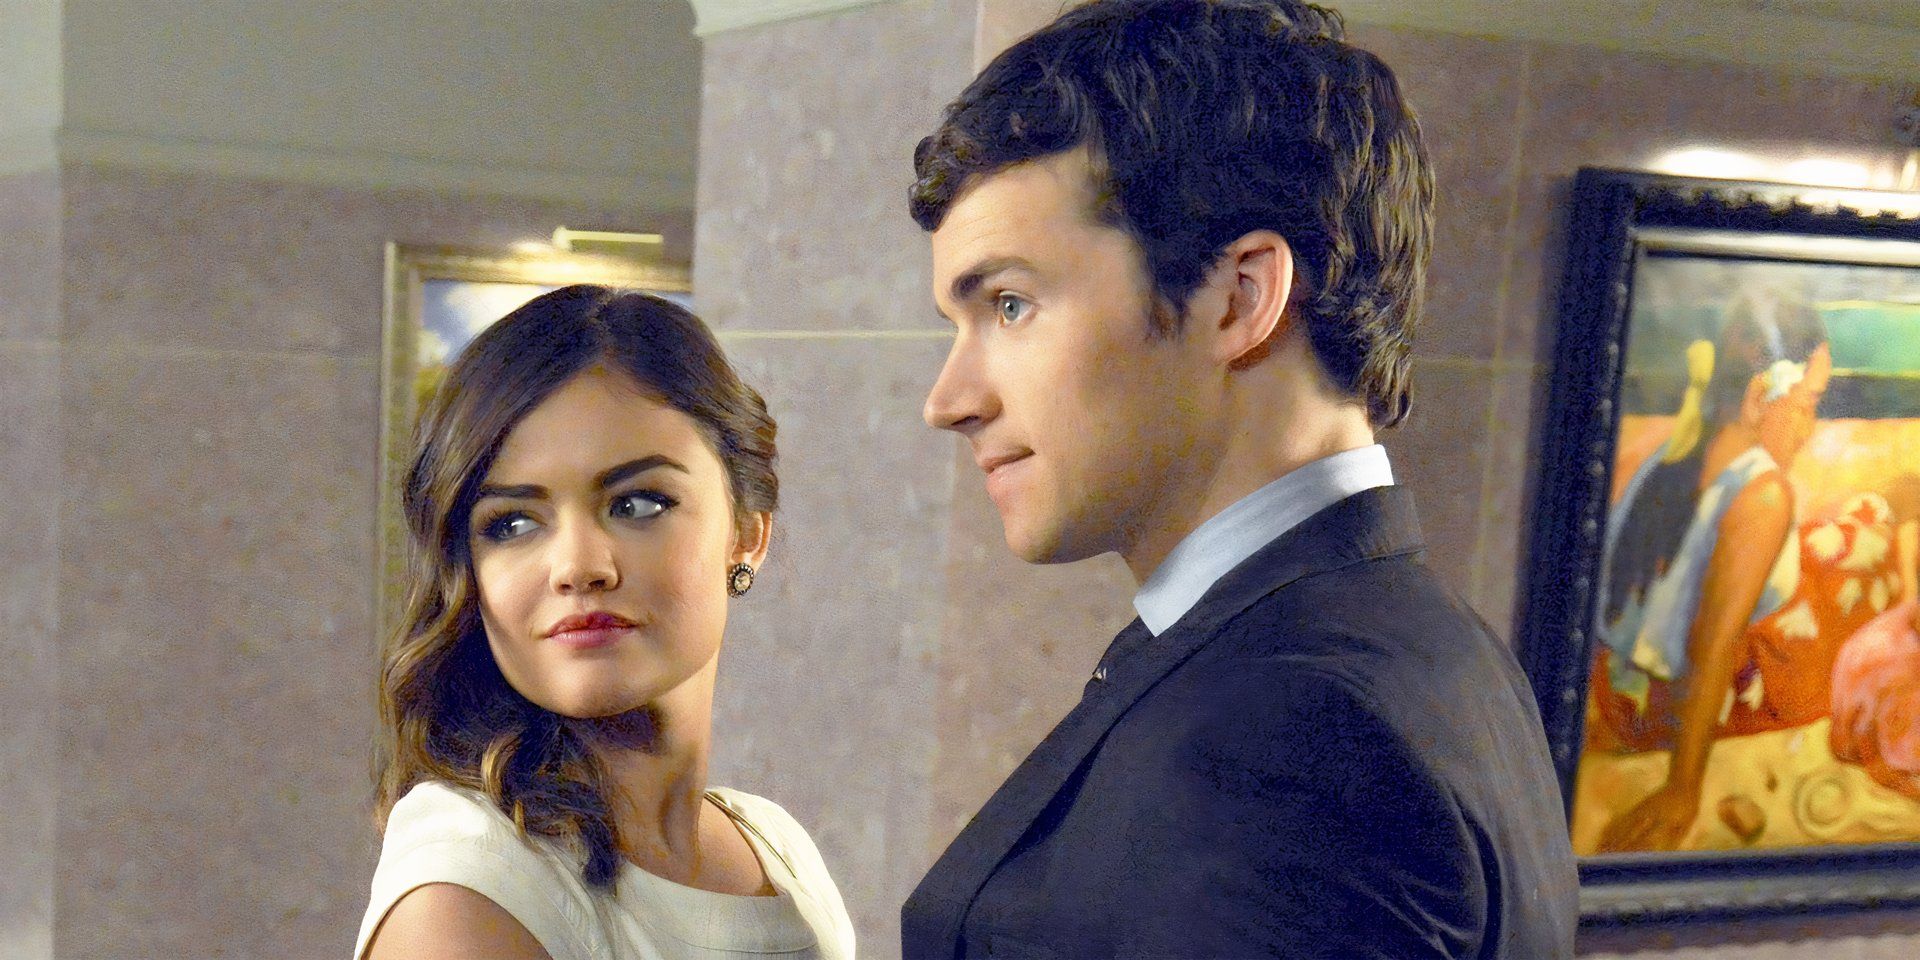 Aria and Ezra standing together in Pretty Little Liars